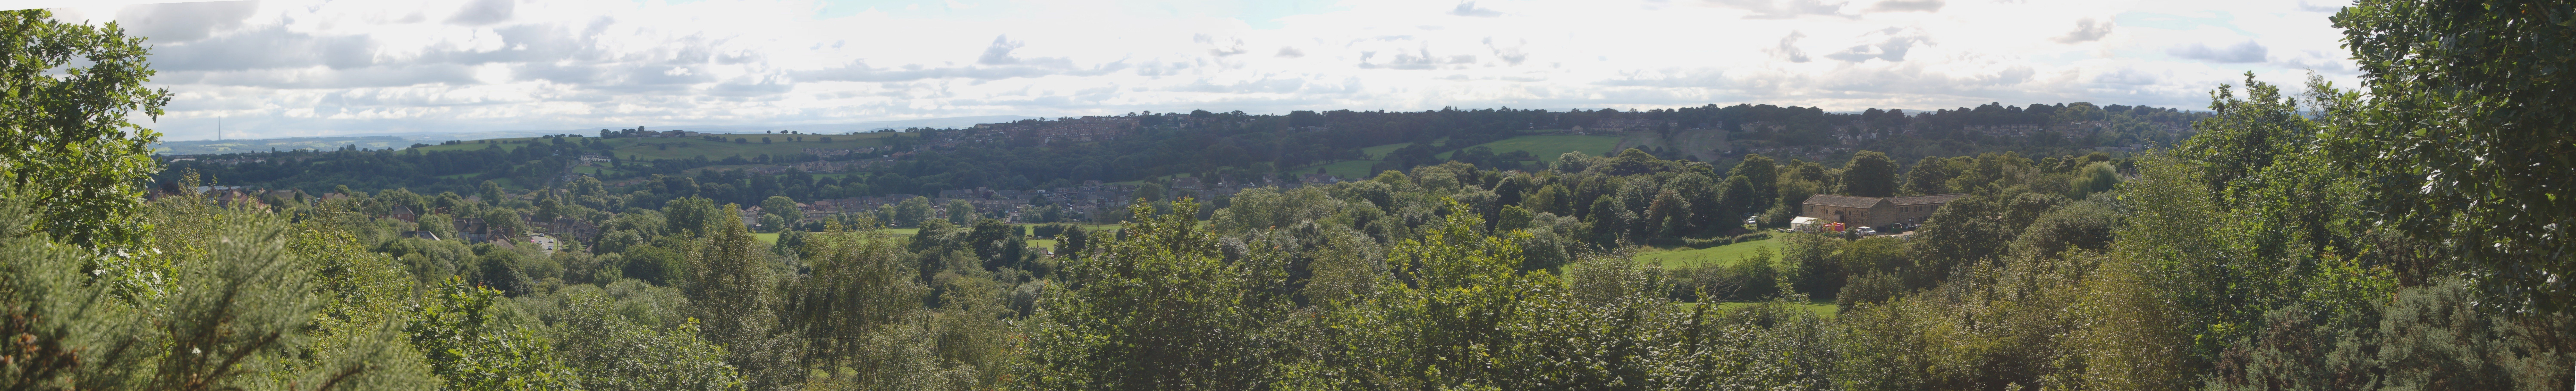 panoramic image of oakwell hall country park